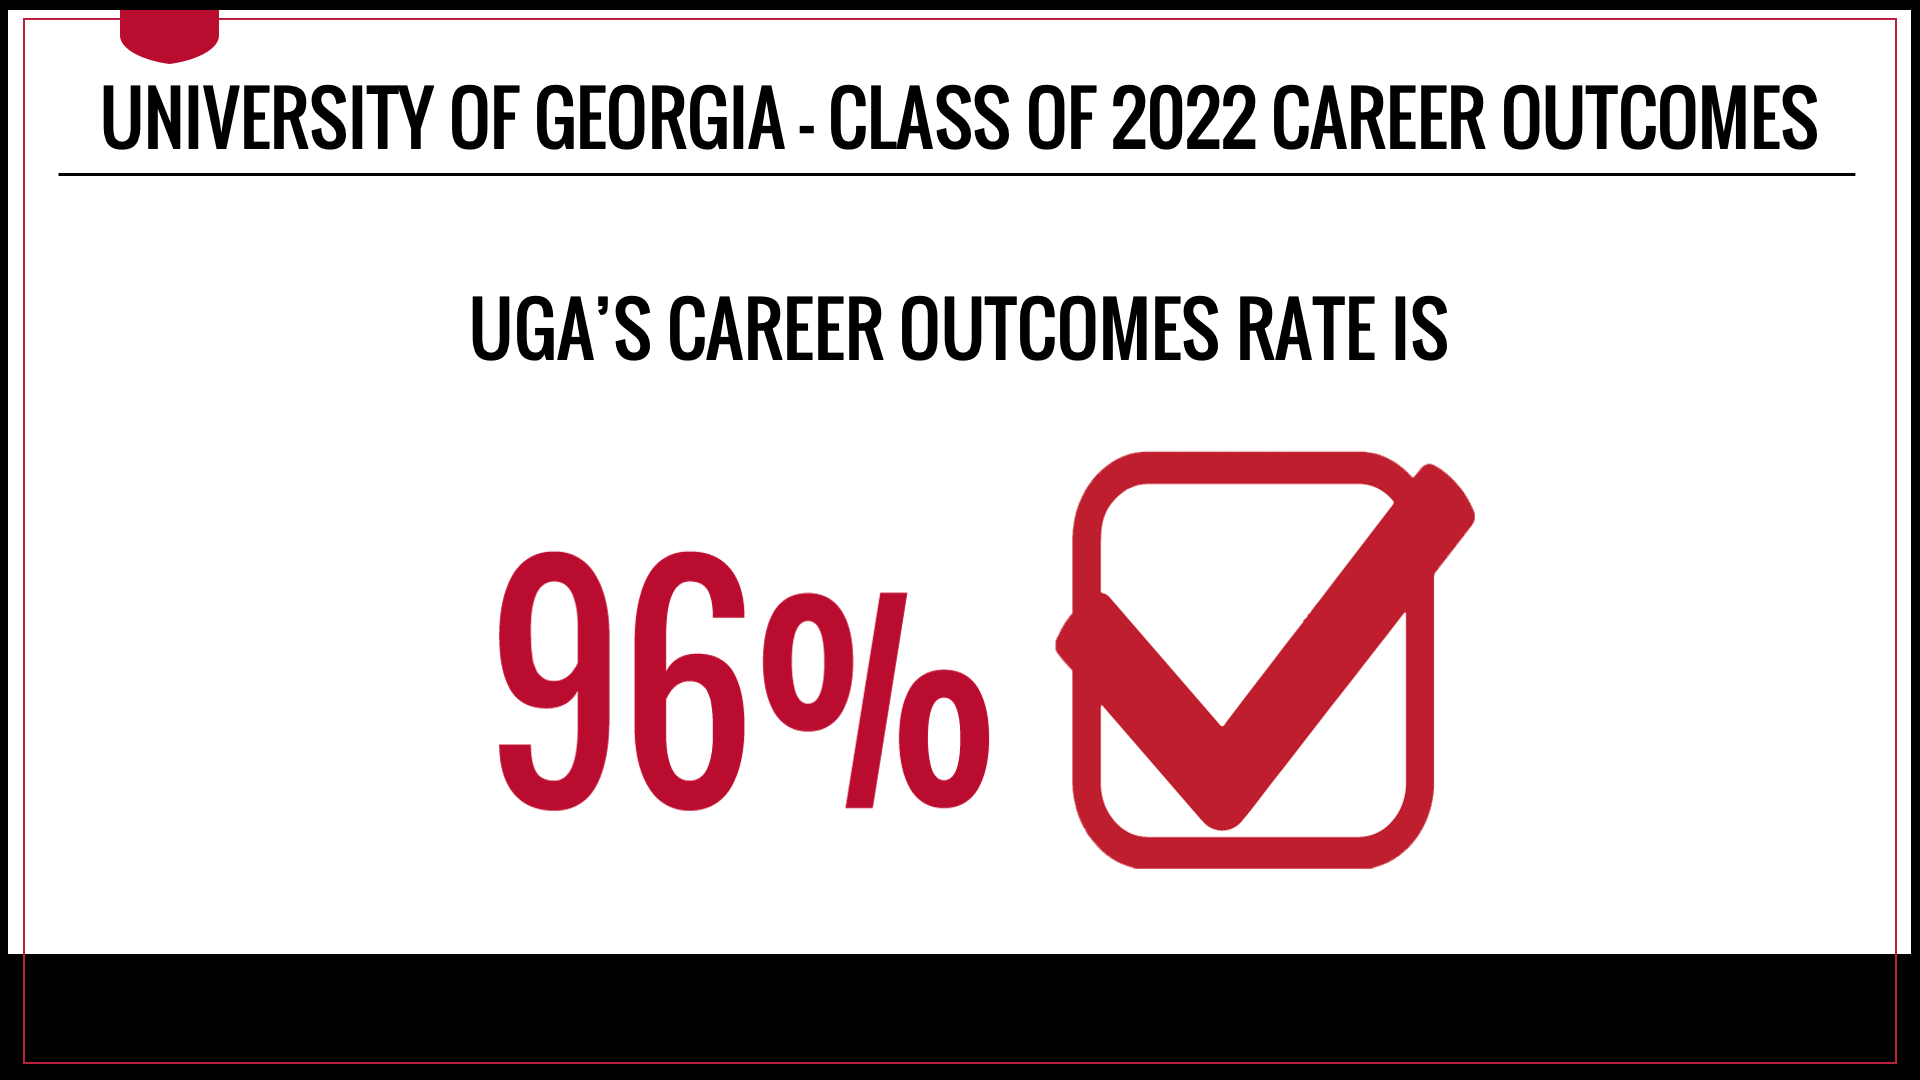 UGA's Class of 2022 Career Outcomes rate is 96 percent